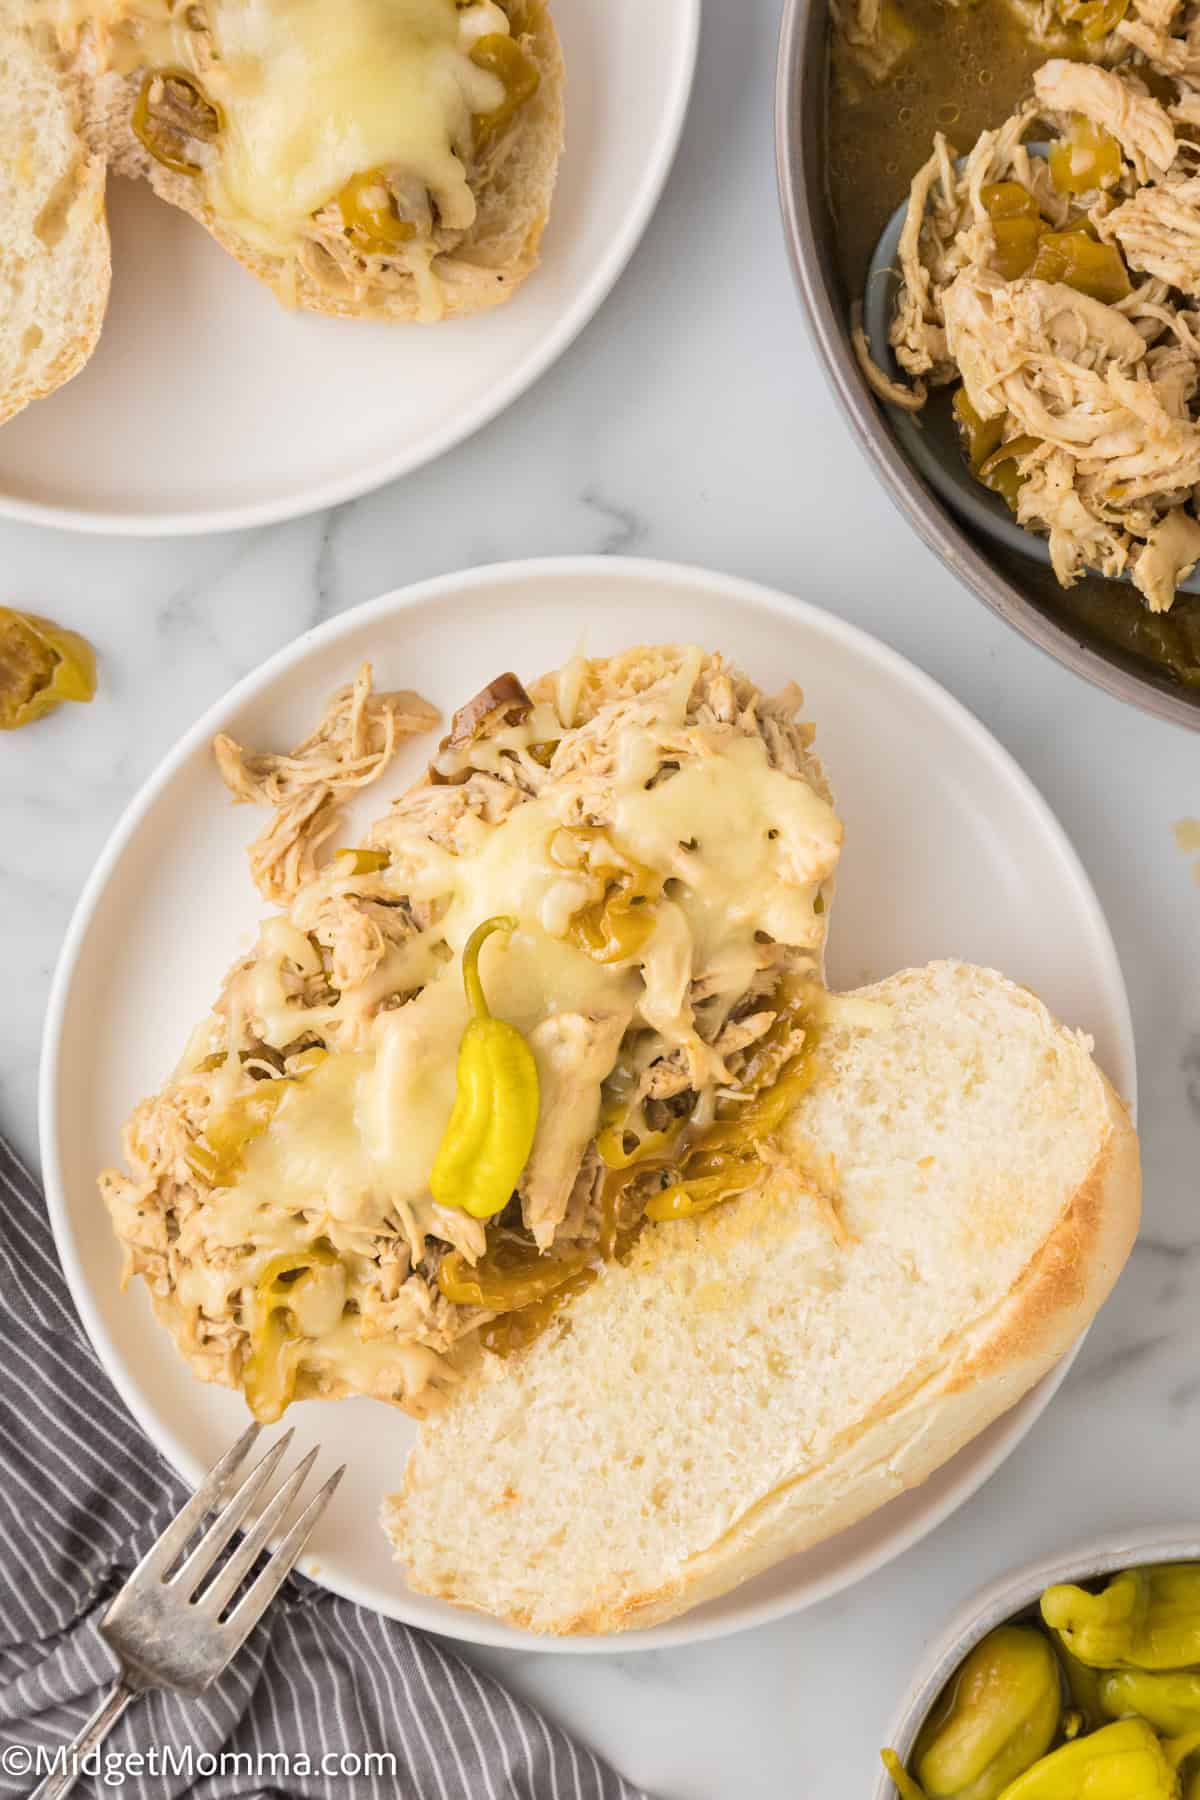 A mississippi chicken sandwich with shredded chicken and melted cheese topped with a pepperoncini on a white plate, accompanied by a bowl of more chicken and peppers on the side.